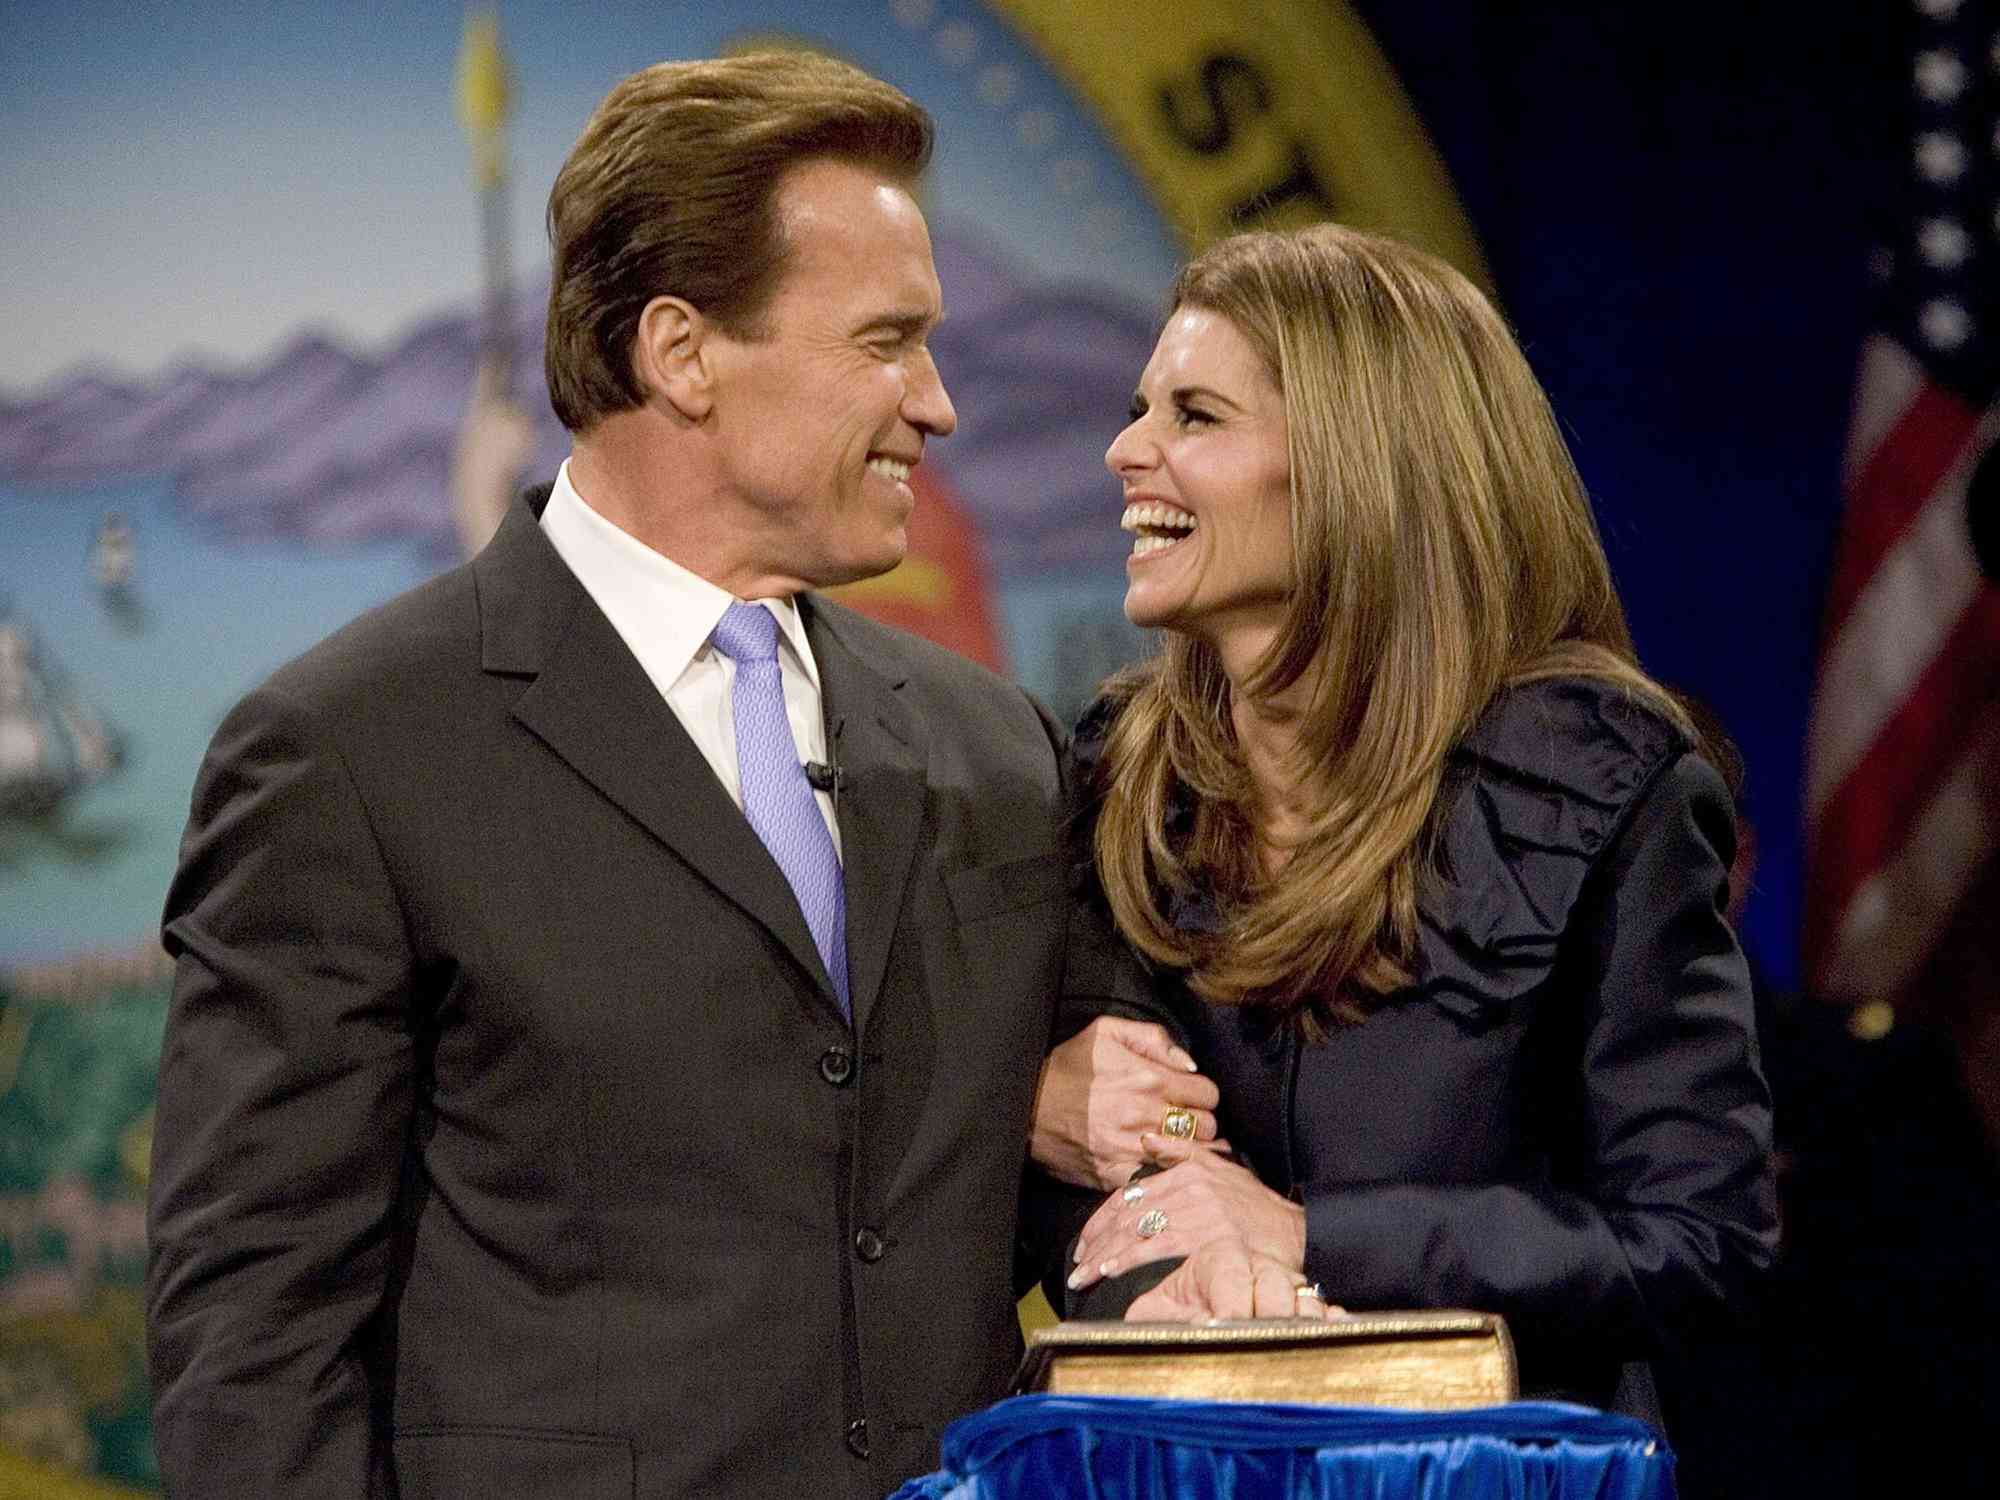 Arnold Schwarzenegger smiles at his wife Maria Shriver after being sworn into office for a second term as Governor on January 5, 2007 in Sacramento, California